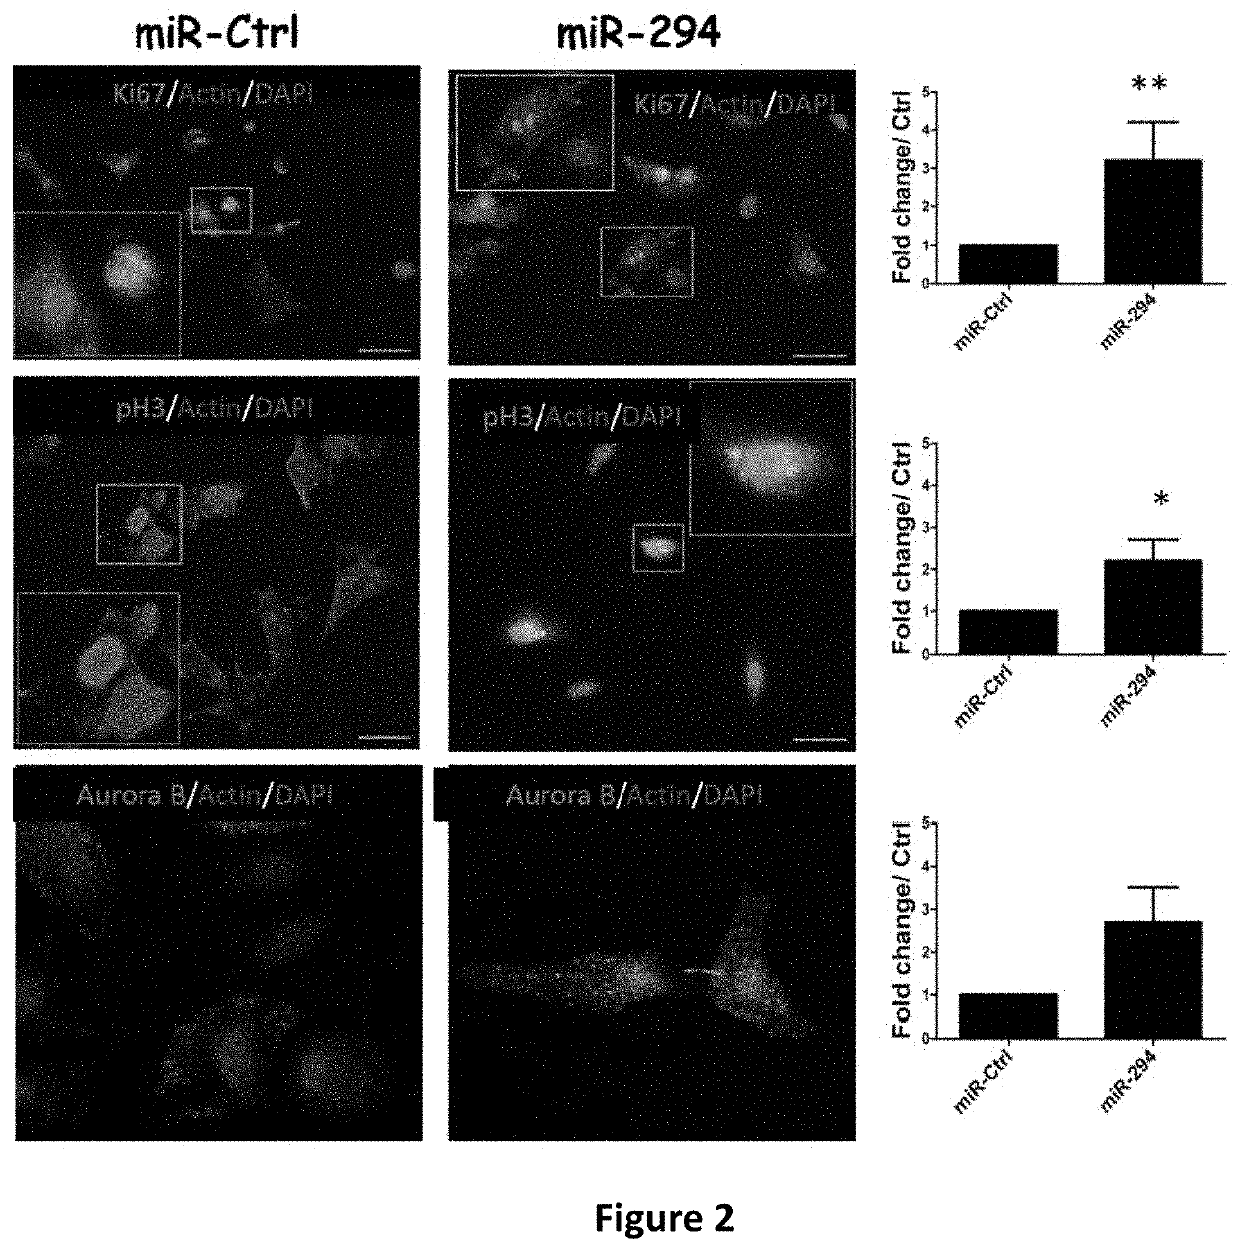 Microrna-294 and lin28a as a driver of cardiac tissue proliferation in response to pathological injury